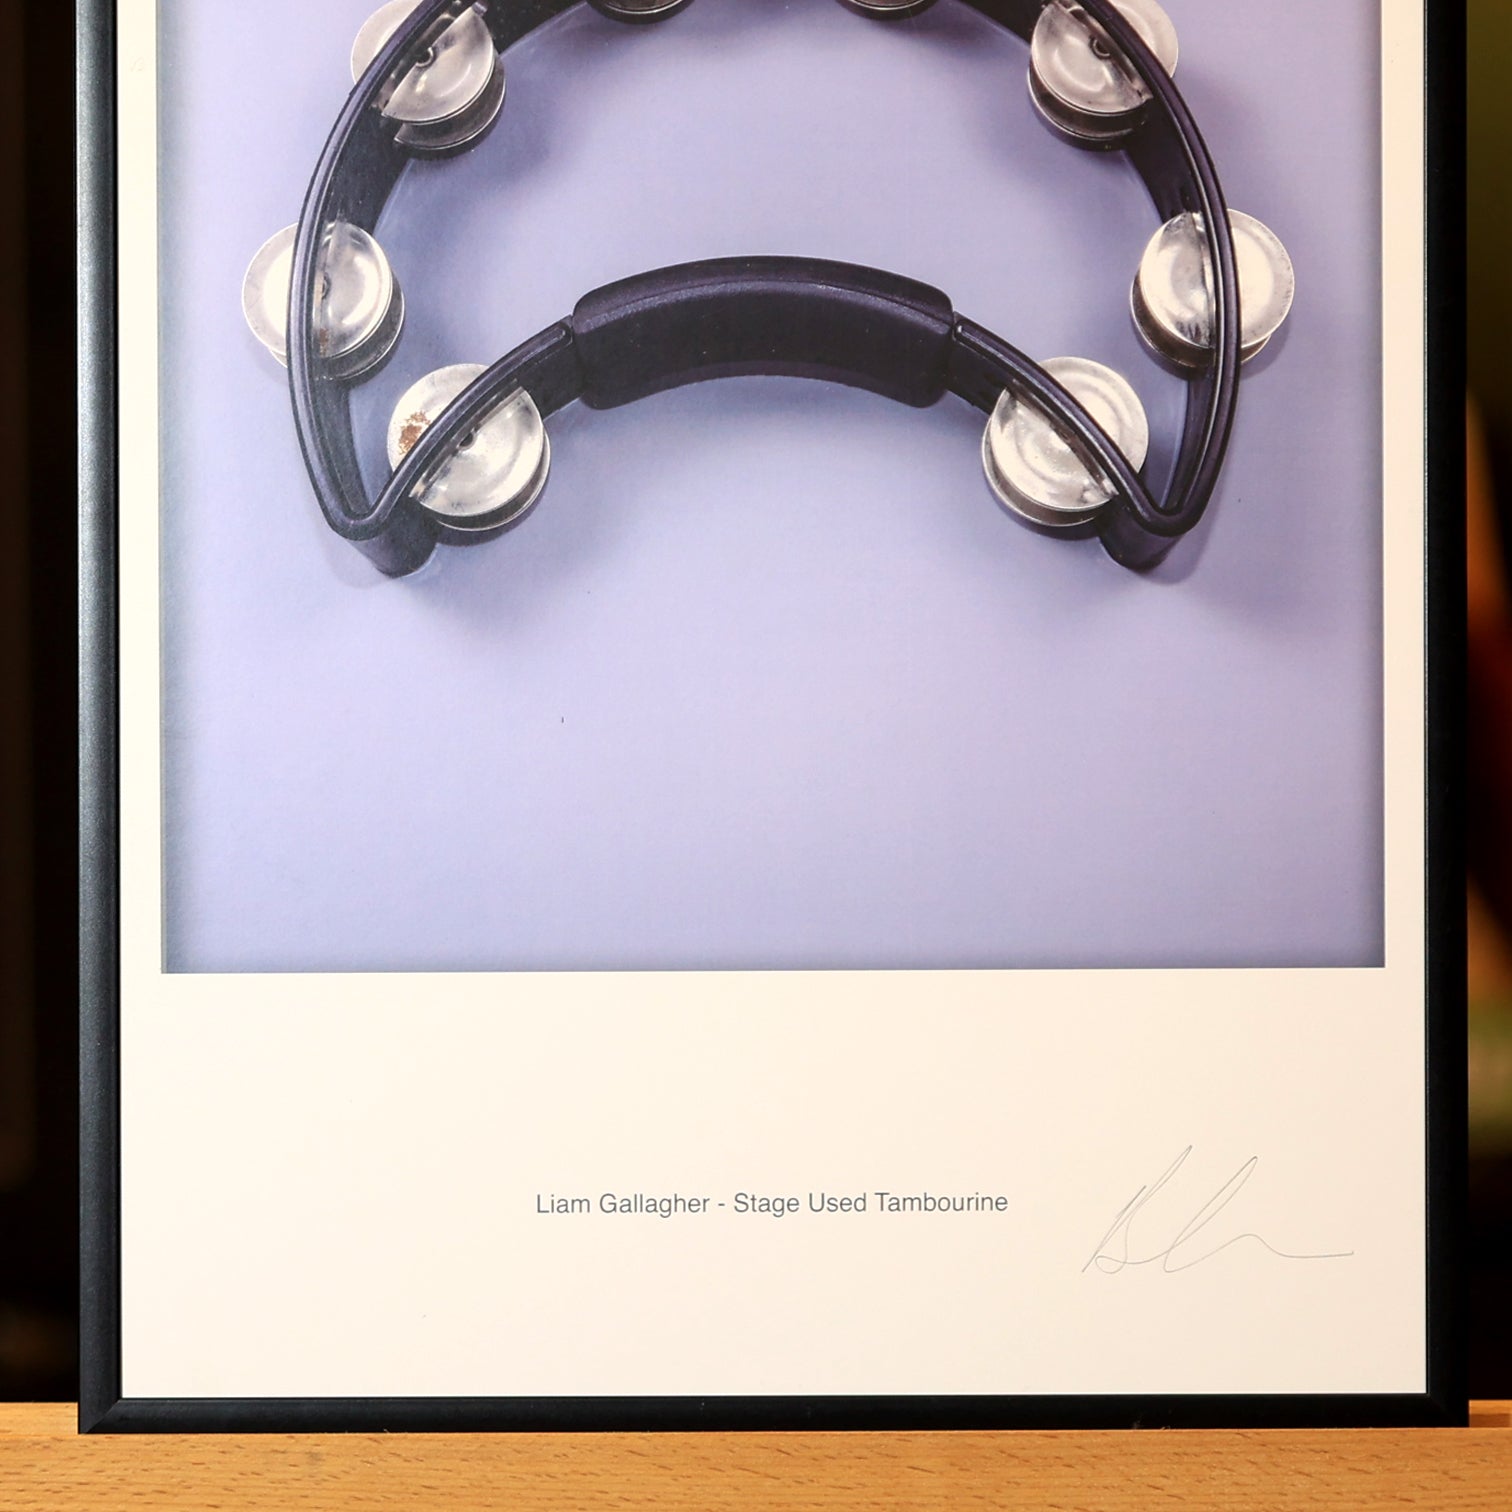 Liam Gallagher - Oasis Stage Used Tambourine Print - New Item